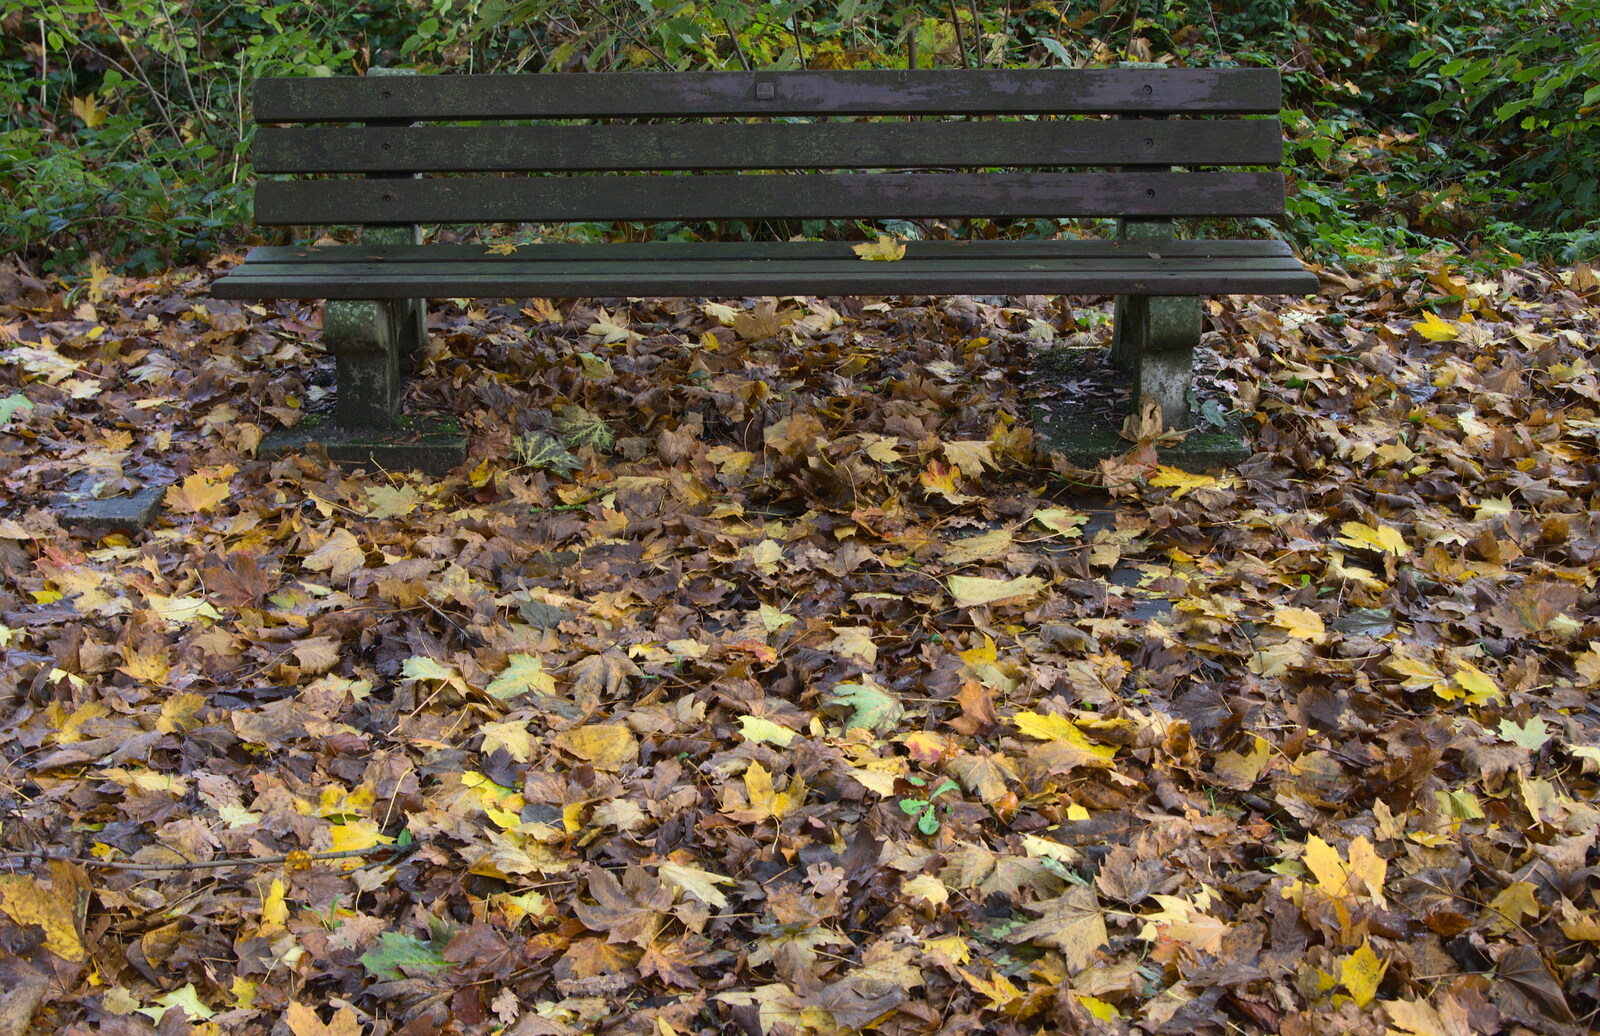 A bench floats in a sea of autumn leaves from A Remembrance Sunday Parade, Eye, Suffolk - 9th November 2014